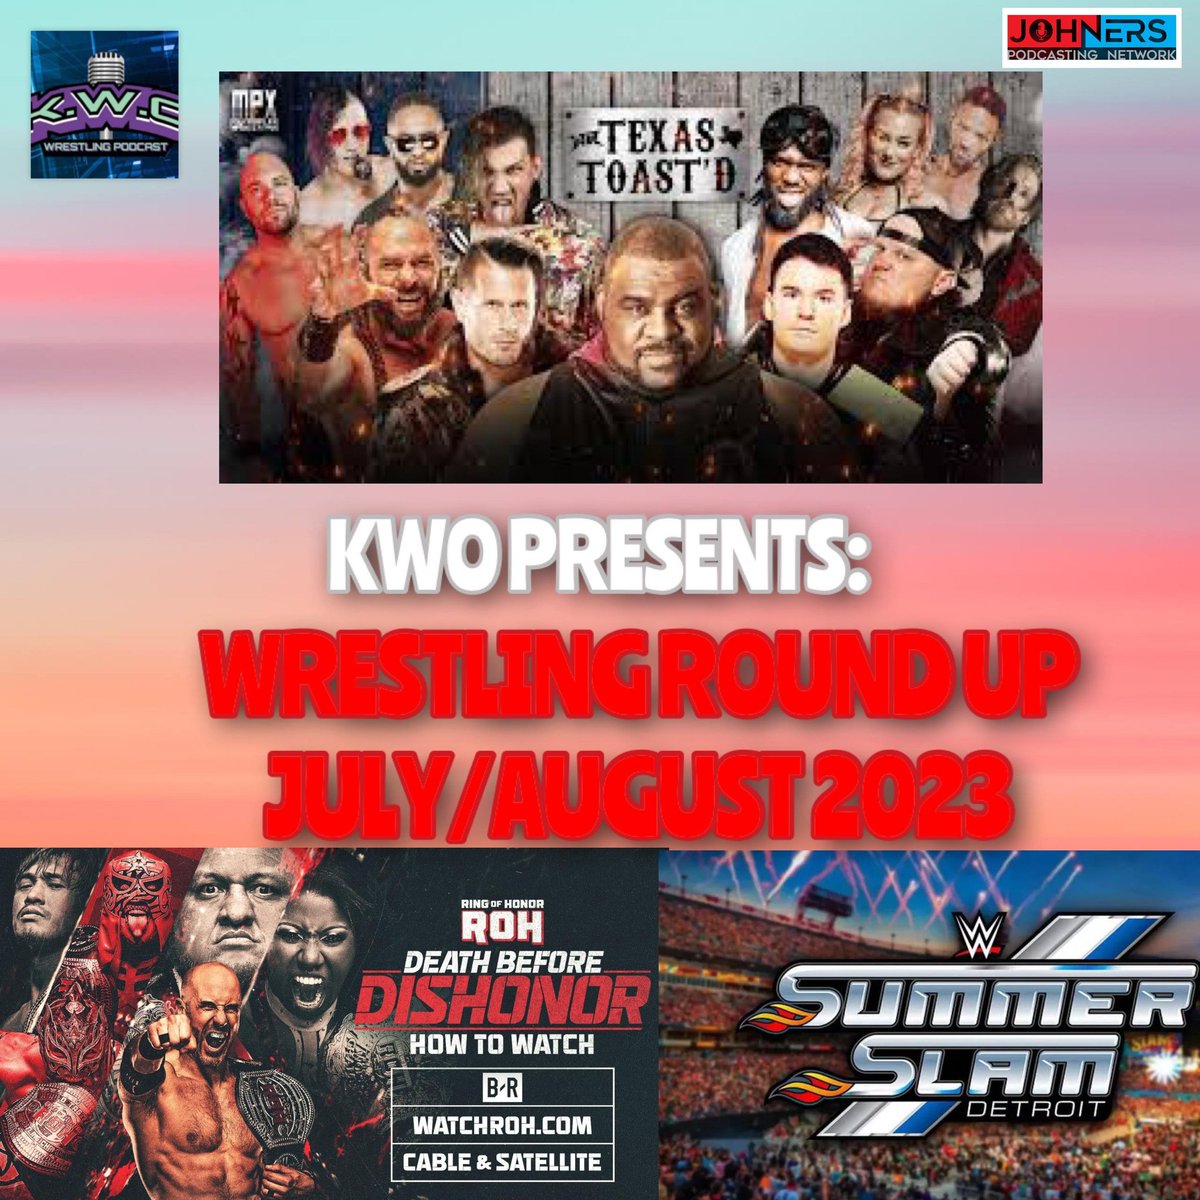 This podcast is the living embodiment of “card subject to change”. 

 #kwo #wrestlingpodcast #wrestlingpodcastuk #wrestling #podcastersofinstagram #podcastlife #podcast #podcastuk #WWE #SummerSlam #WrestlingRevolver #ROH #deathbeforedishonor